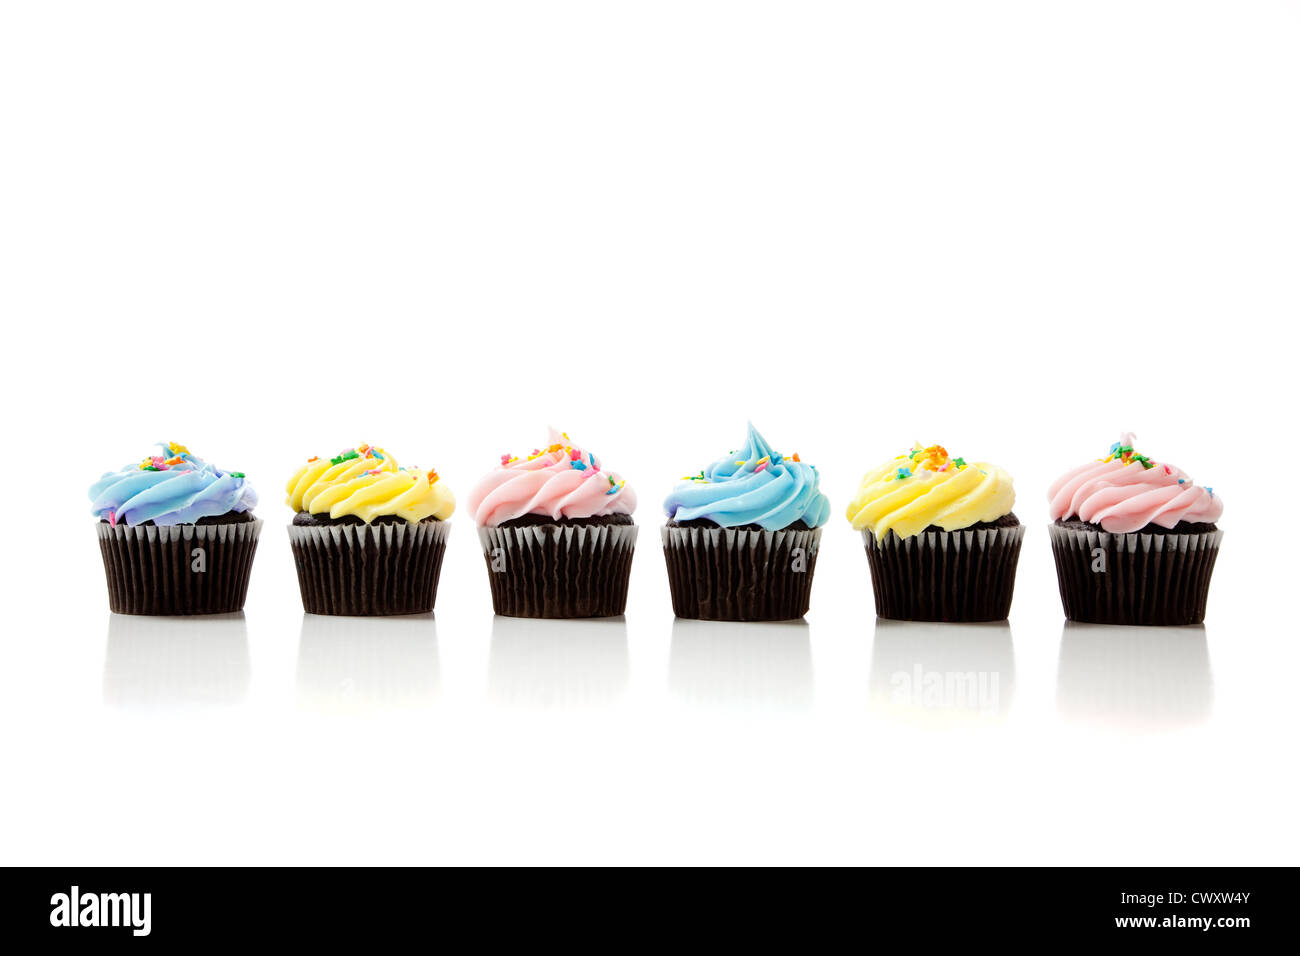 A row of lightly colored chocolate cupcakes on a white background Stock Photo